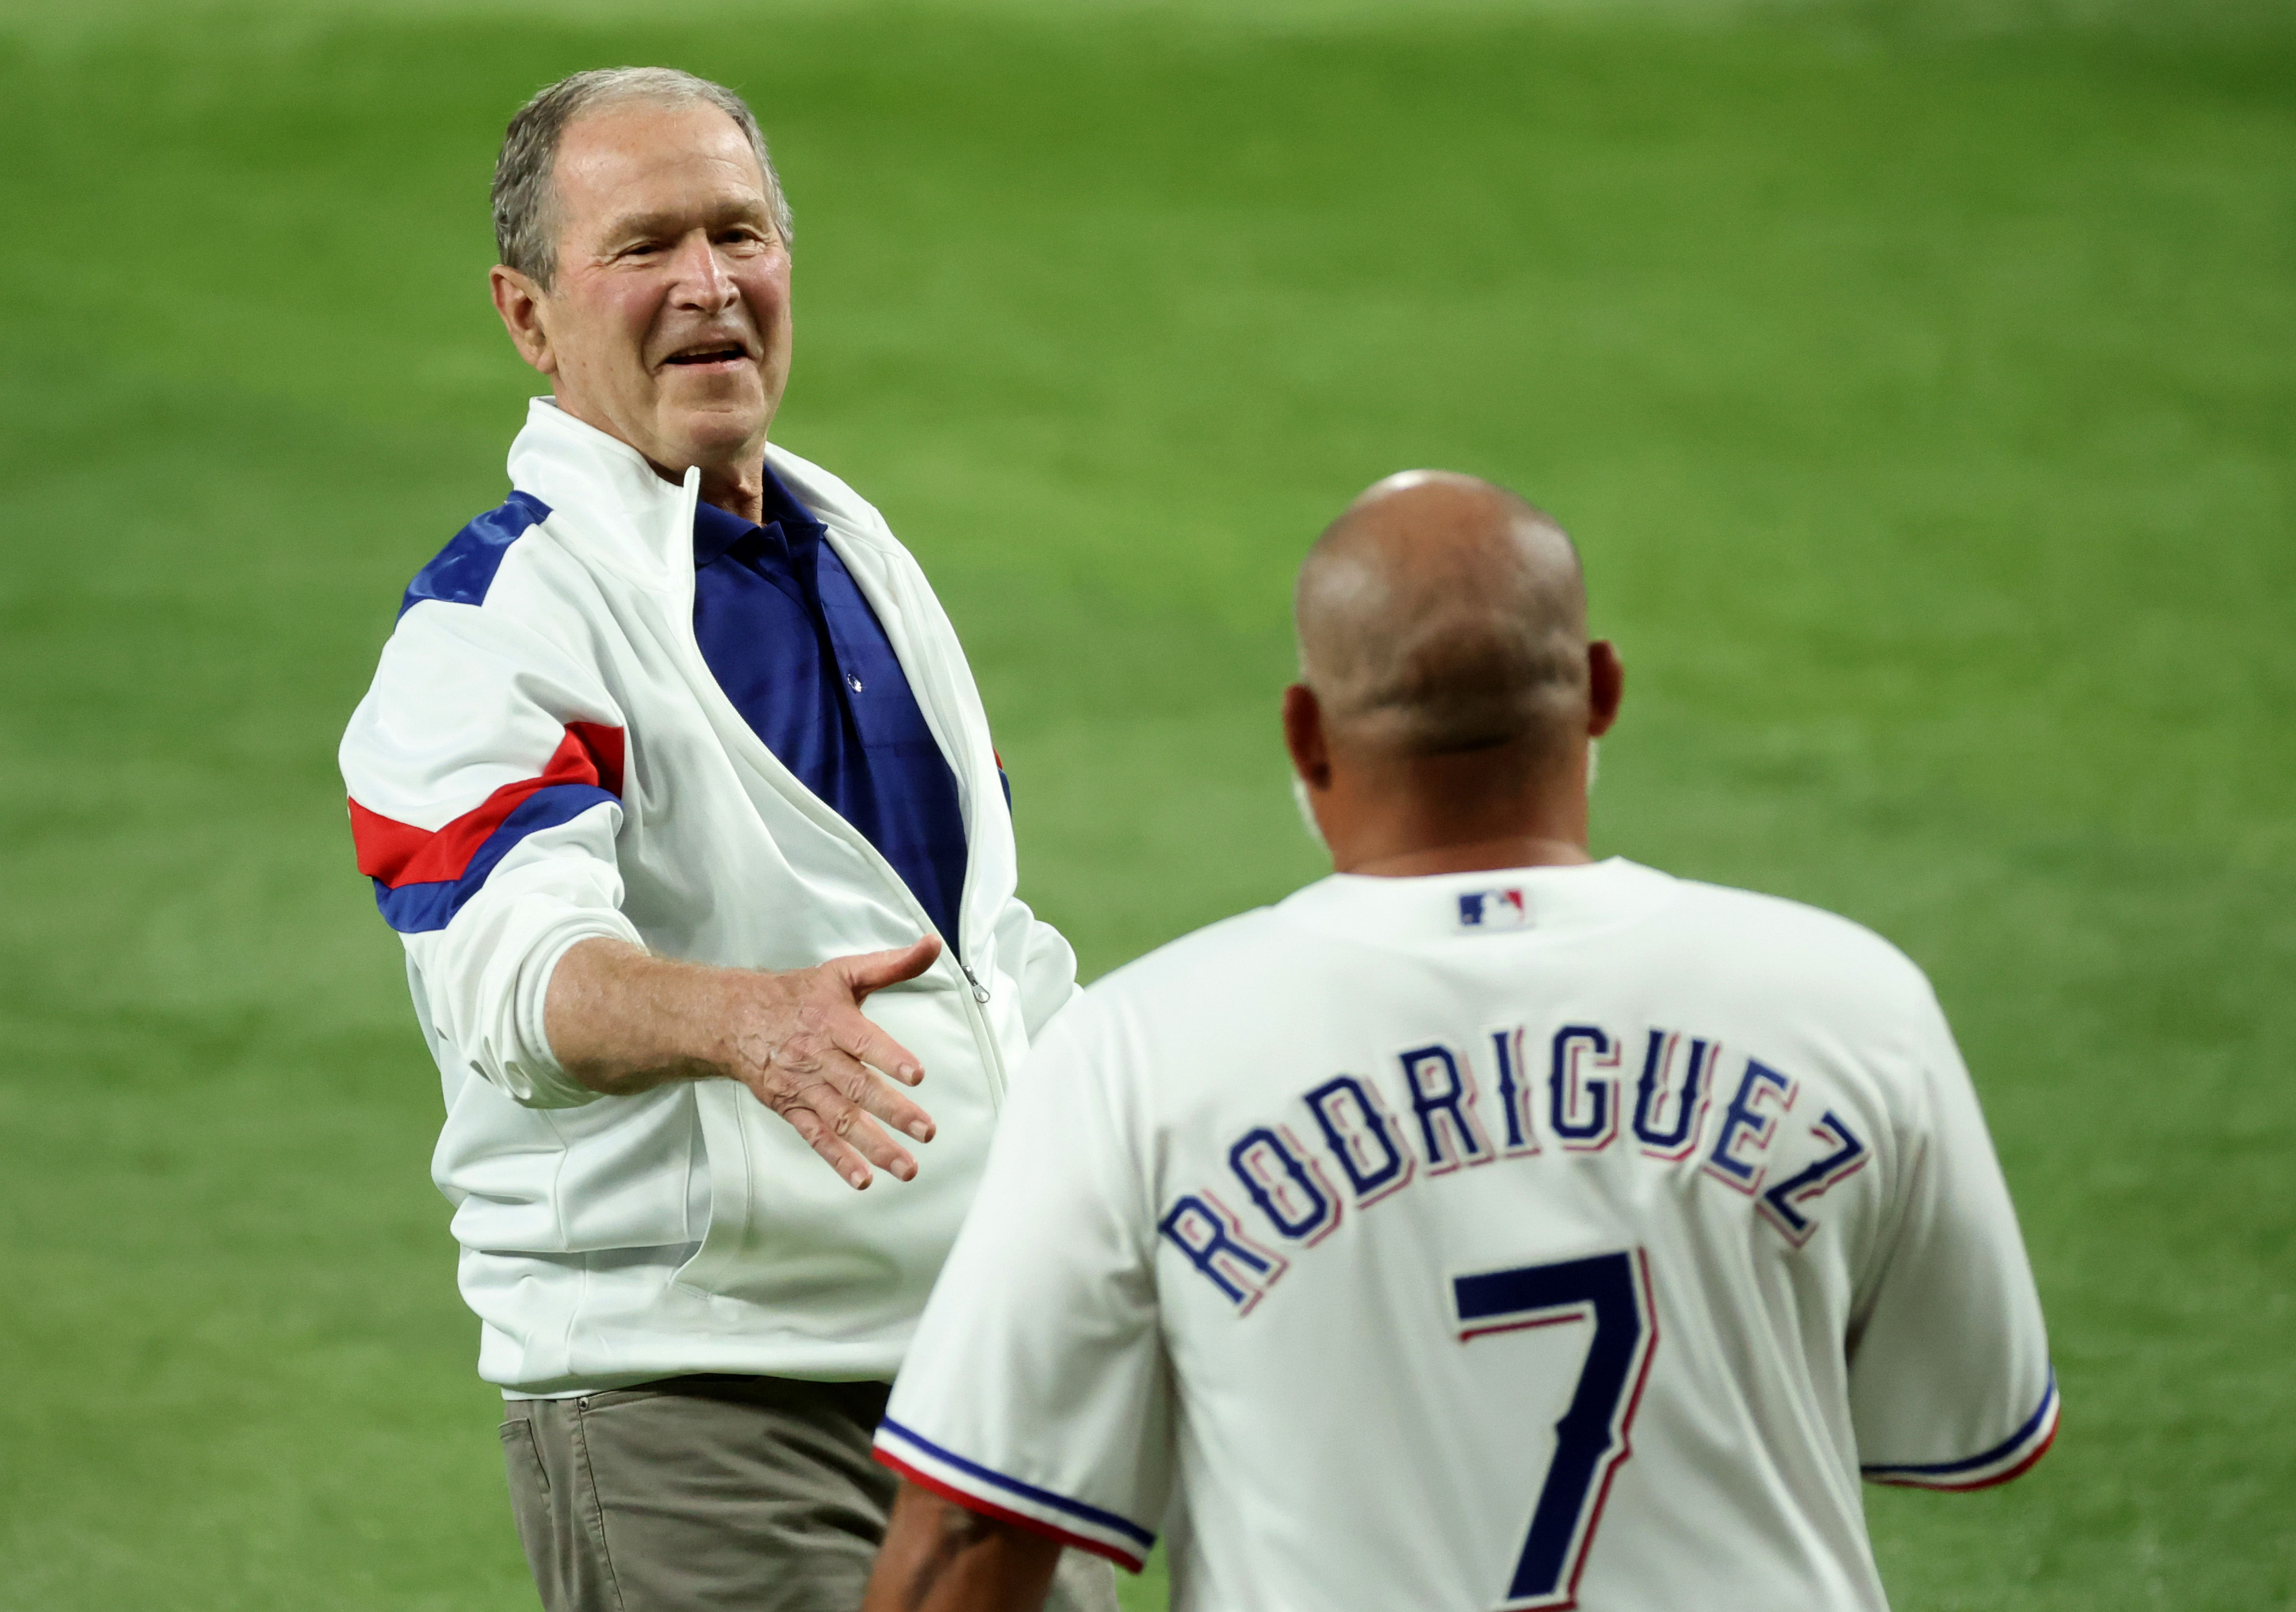 George W. Bush and Ivan Rogriguez (Image via USA Today)